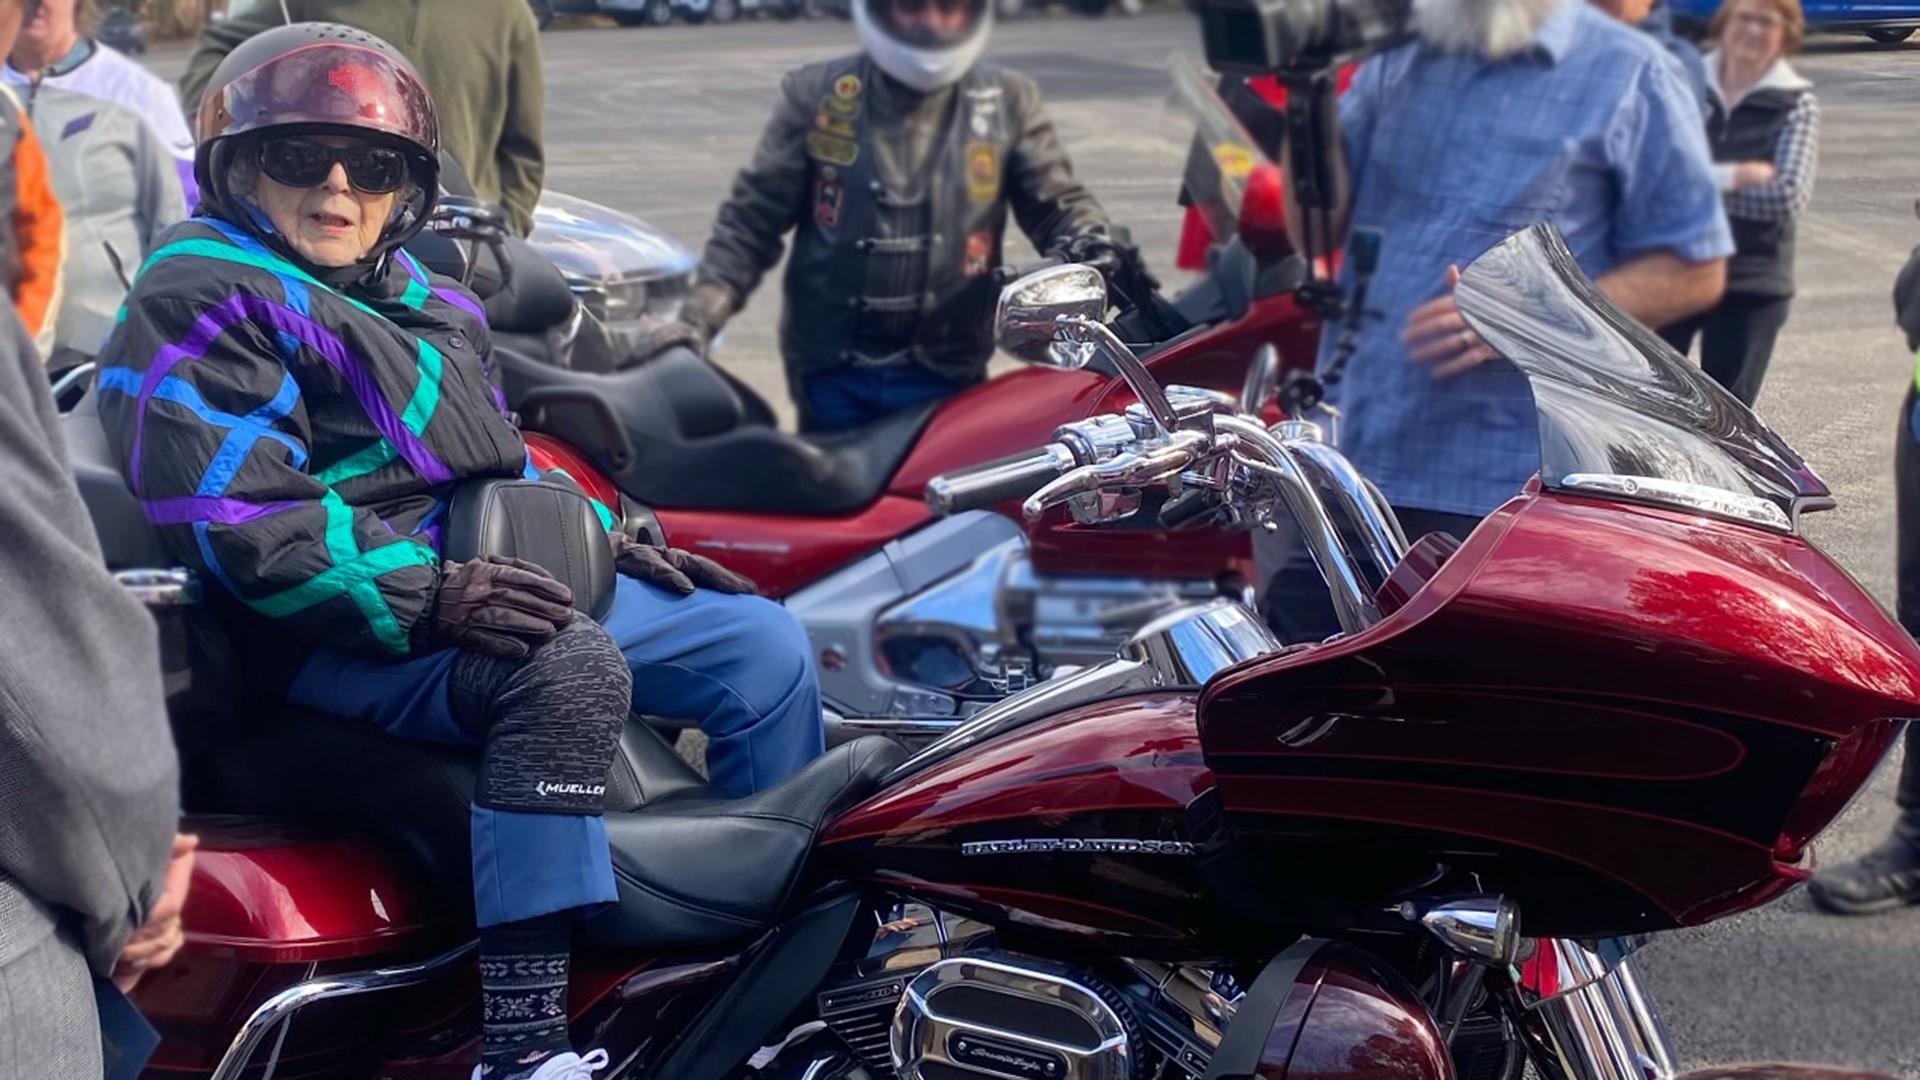 A BELLA VISTA WOMAN IS CELEBRATING HER BIRTHDAY IN STYLE – WITH A MOTORCYCLE TOUR AROUND TOWN...